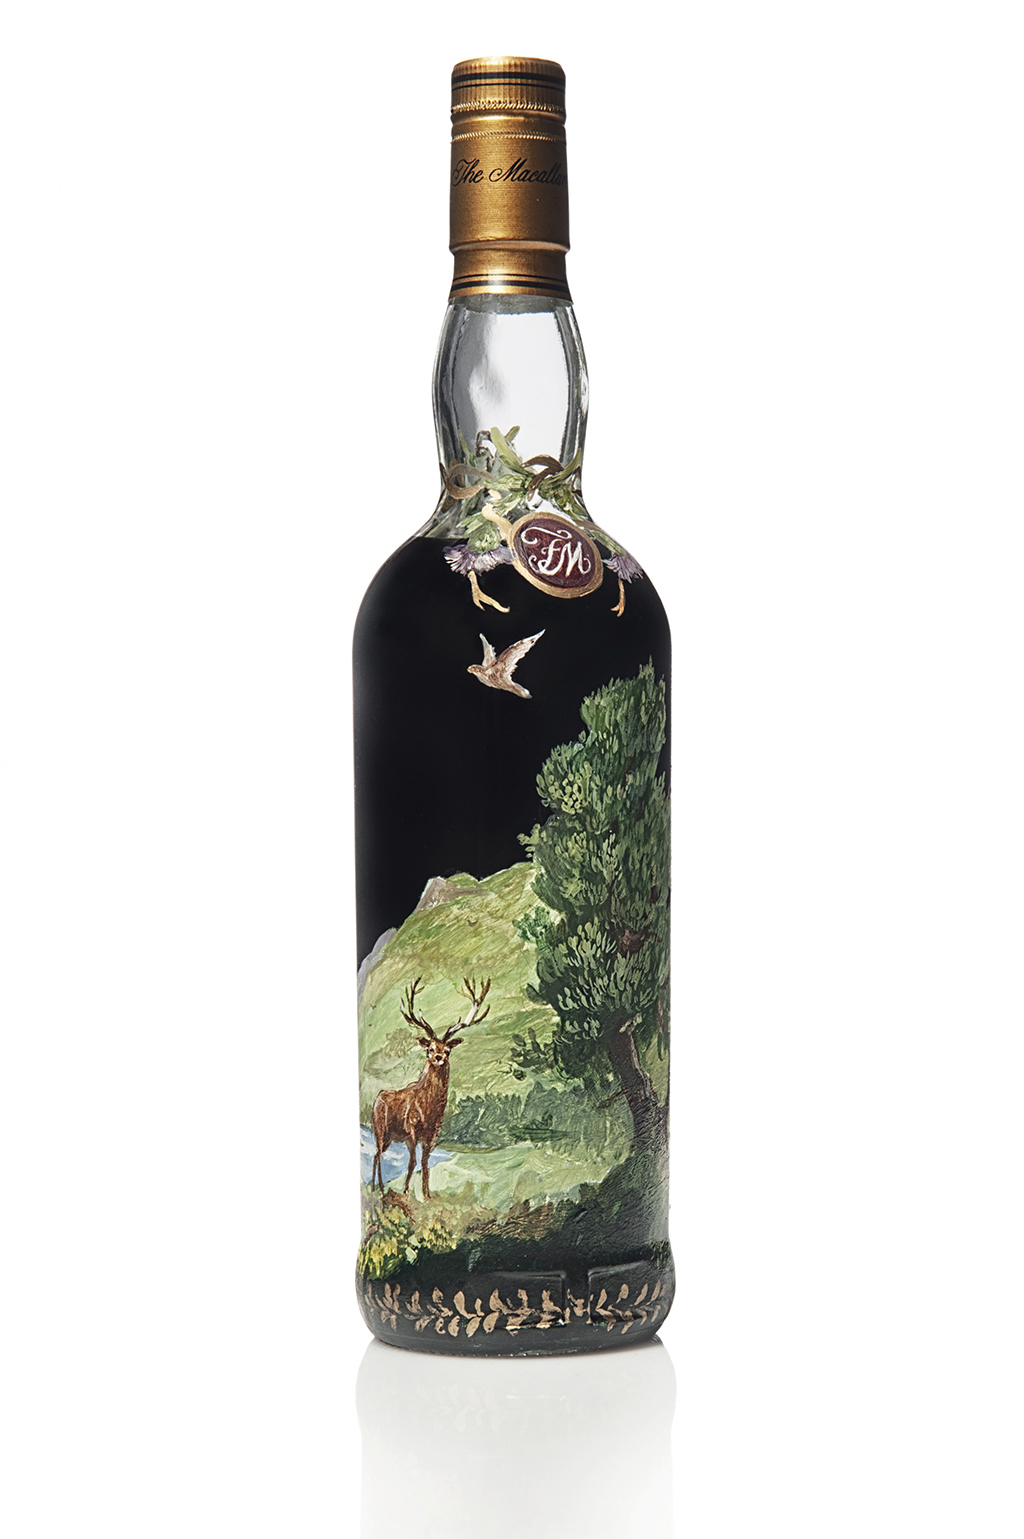 The back of the 1926 Macallan hand-painted bottle by Michael Dillon (Photo: Christie’s Images)